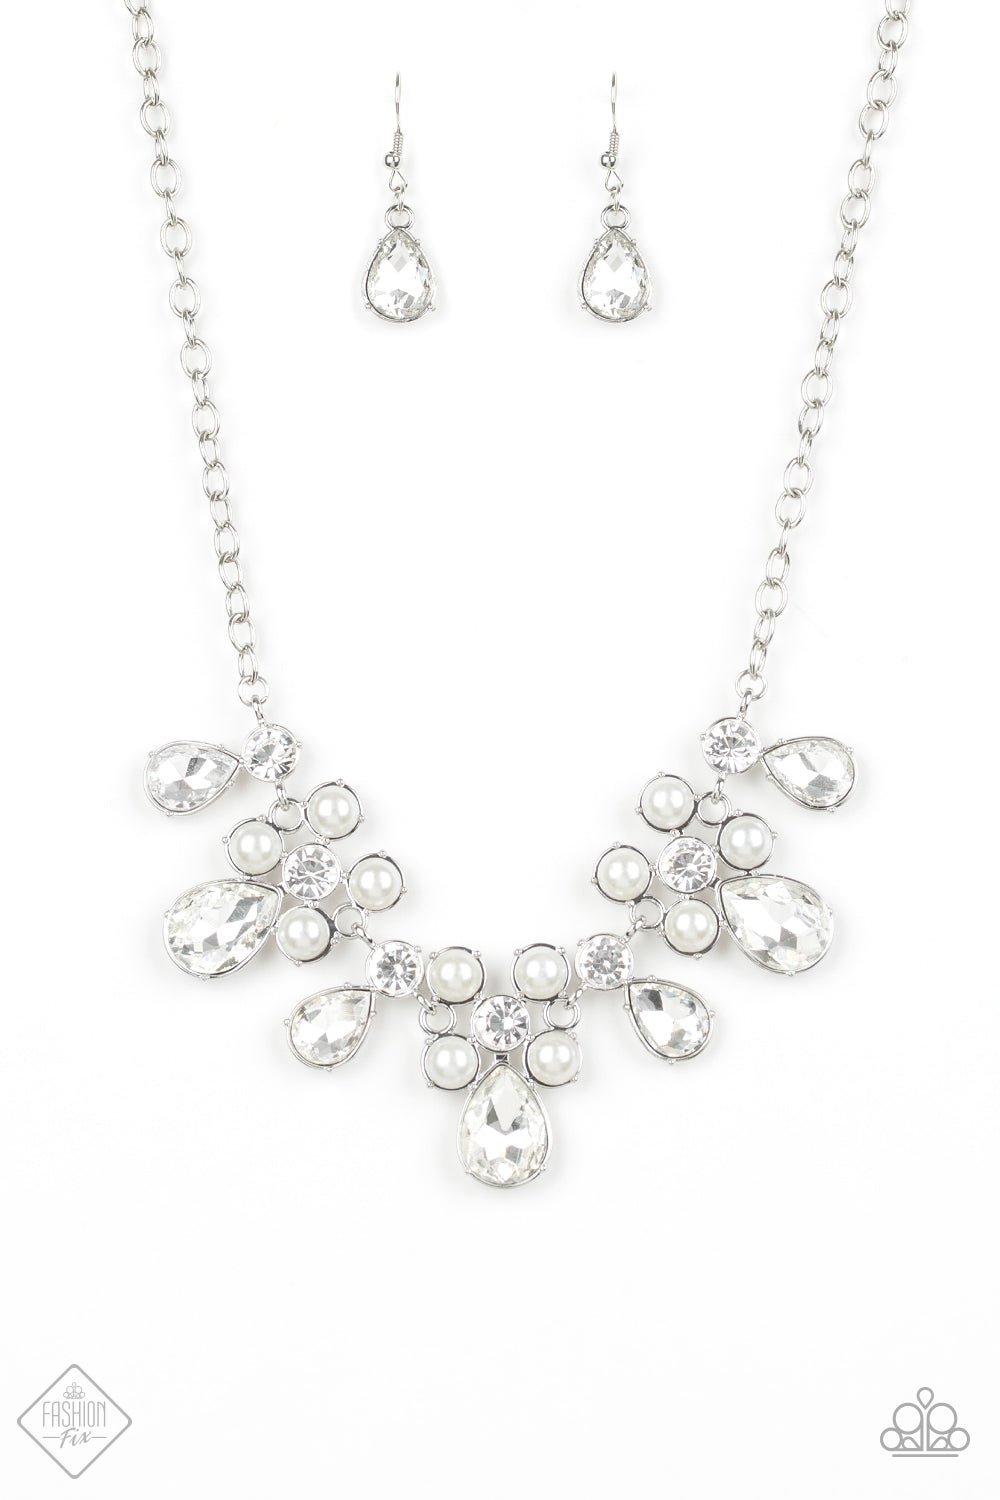 A71 - Demurely Debutante, Paparazzi White Necklace by Paparazzi Accessories on Fancy5Fashion.com